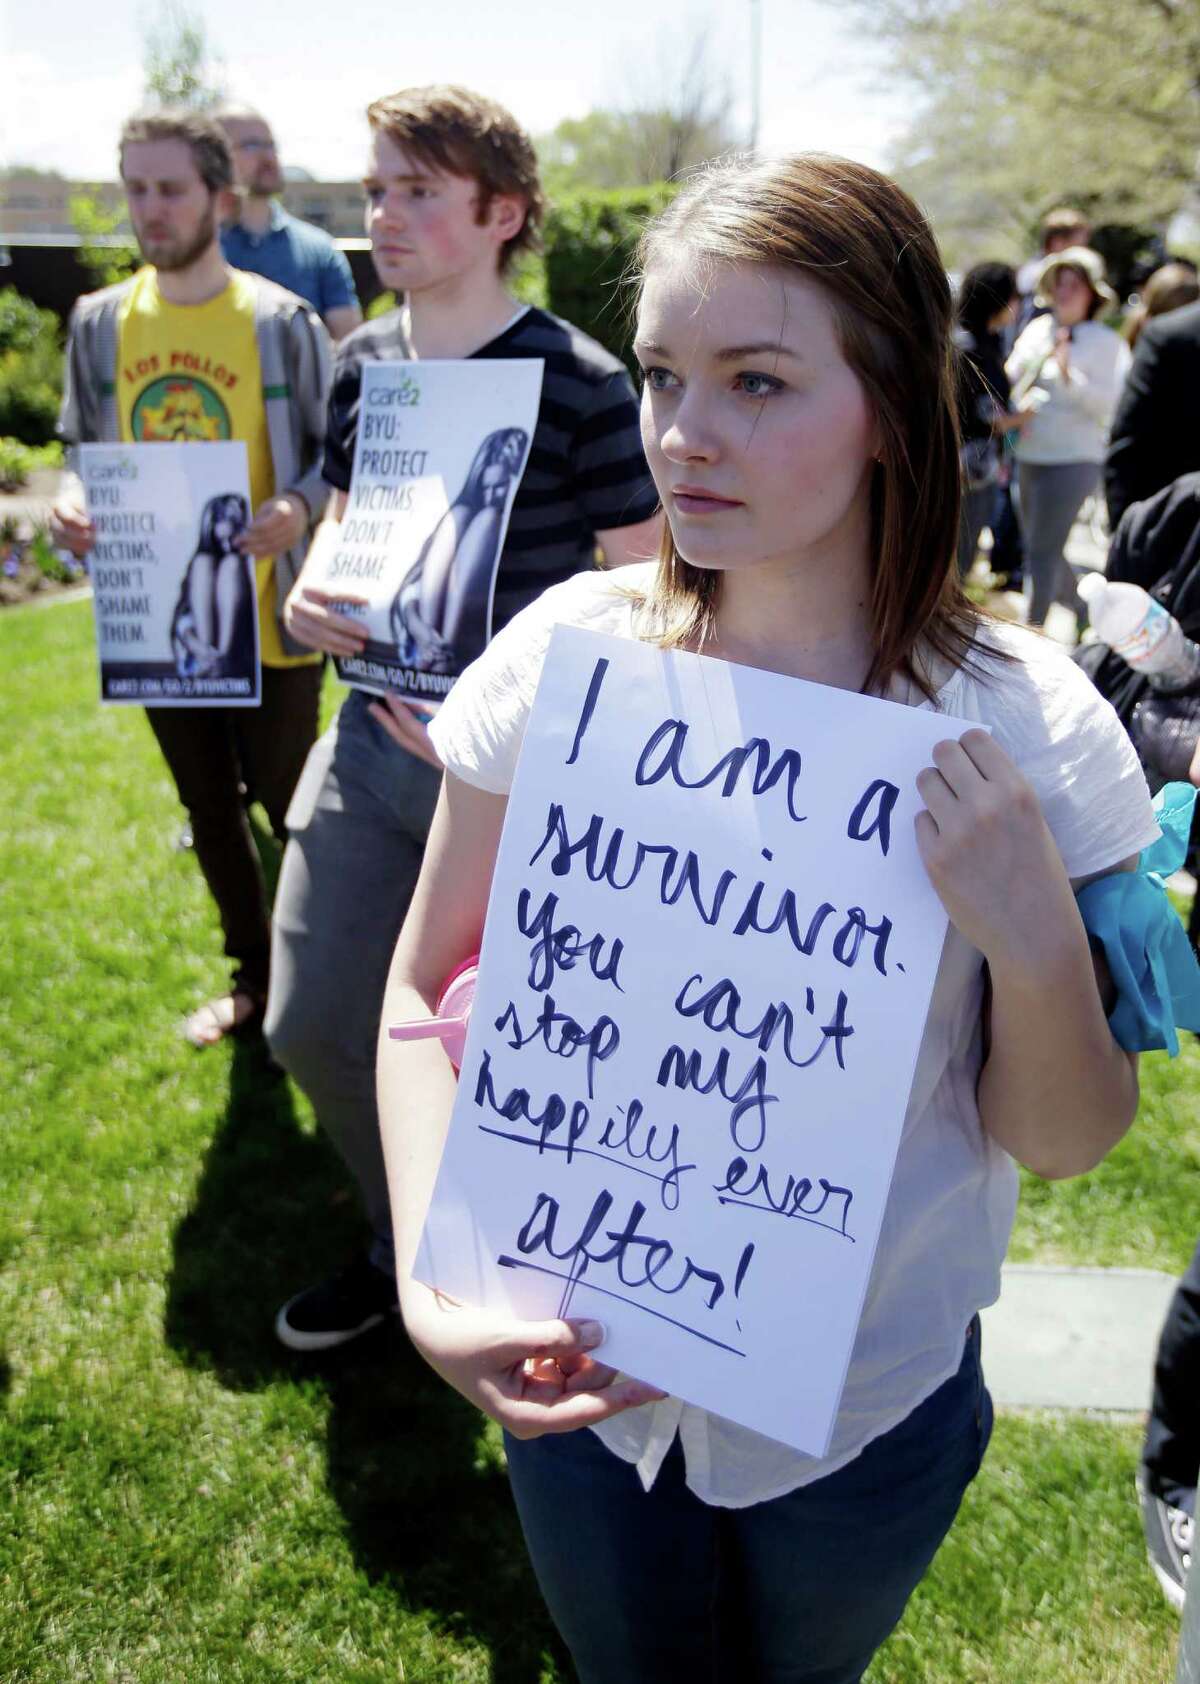 Katie Townsley and other demonstrators ﻿at Brigham Young University on Wednesday say school policy discourages women from reporting sexual violence.